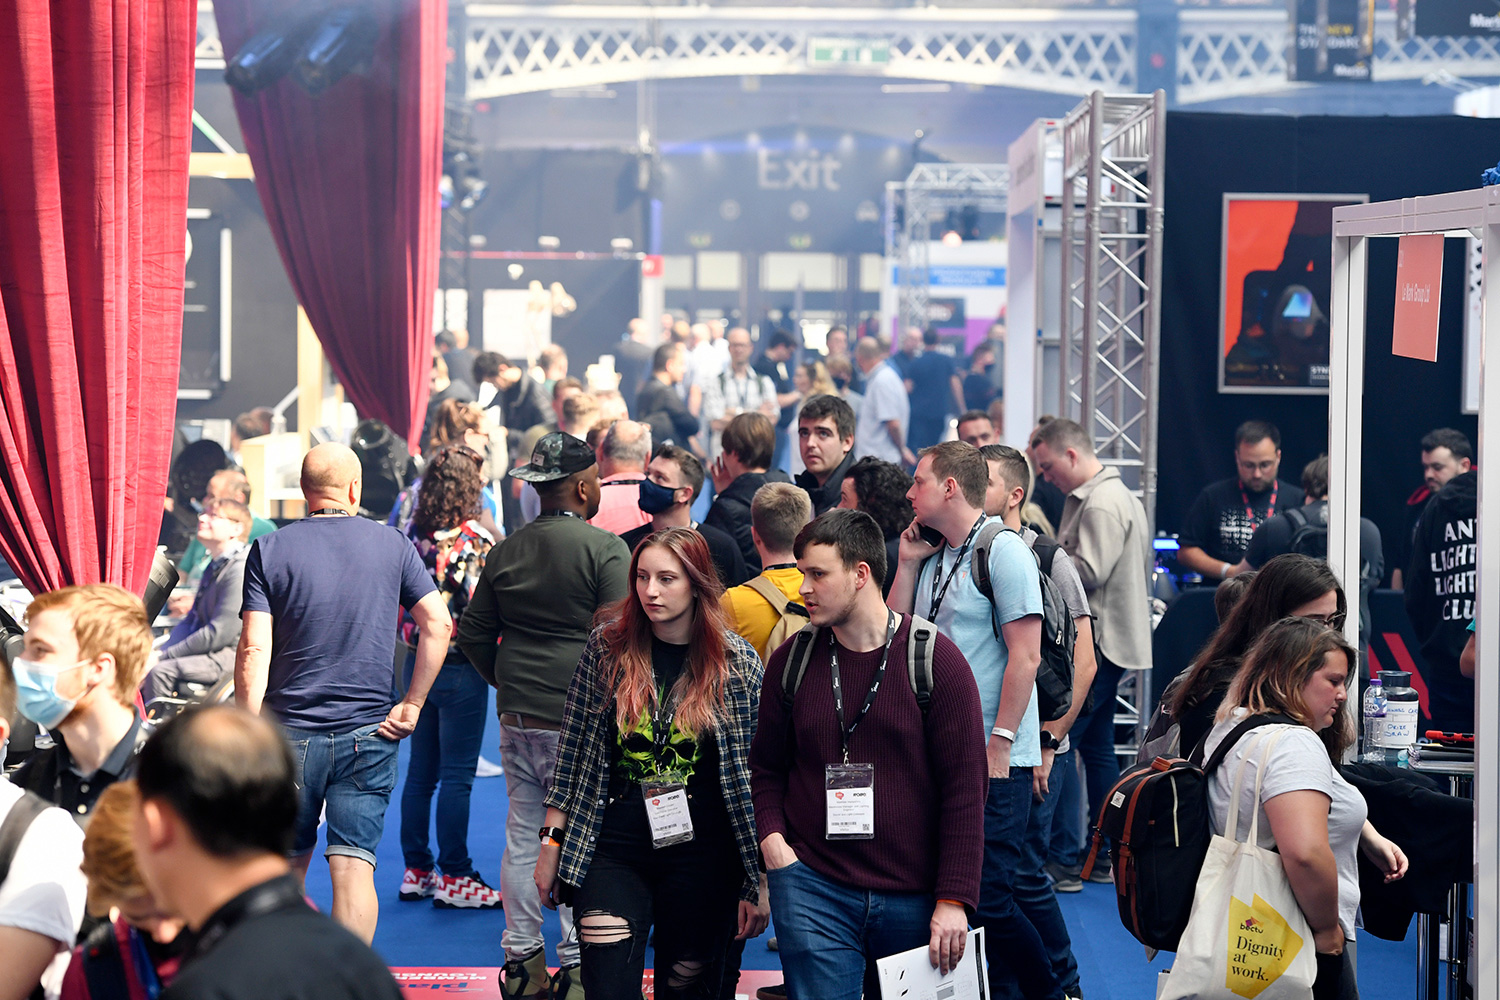 After two years PLASA Show has finally returned to Olympia London